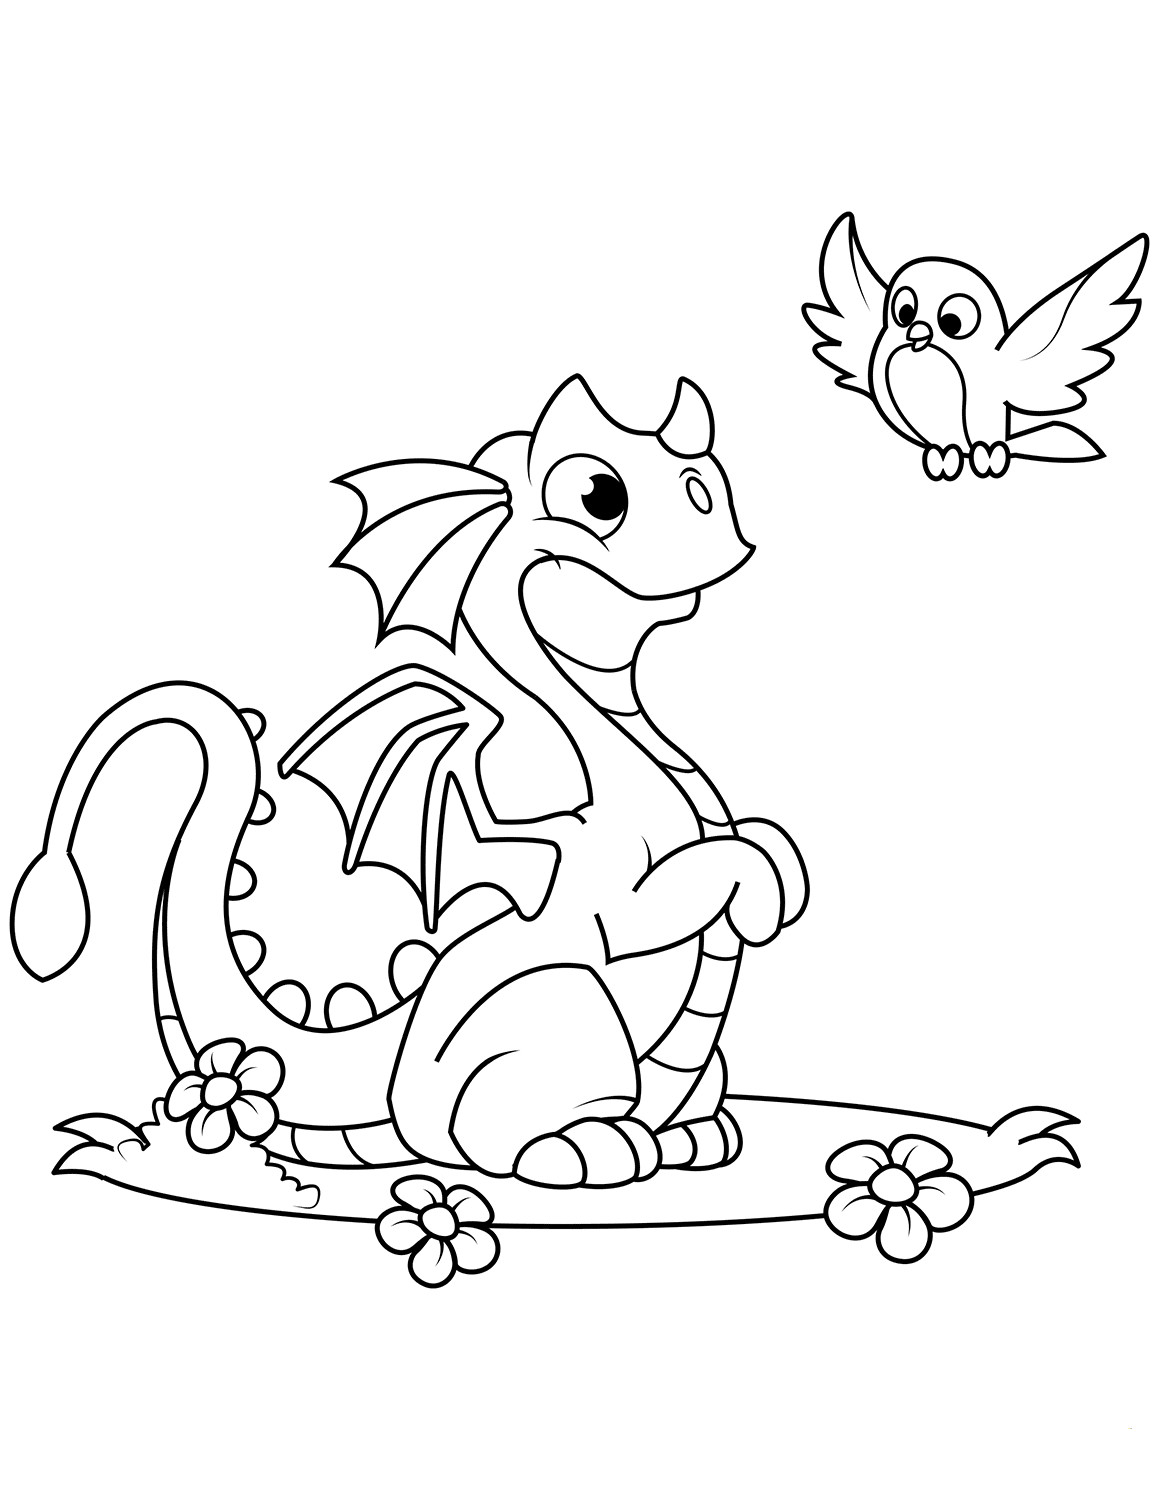 Cute Baby Dragon Coloring Pages
 35 Free Printable Dragon Coloring Pages